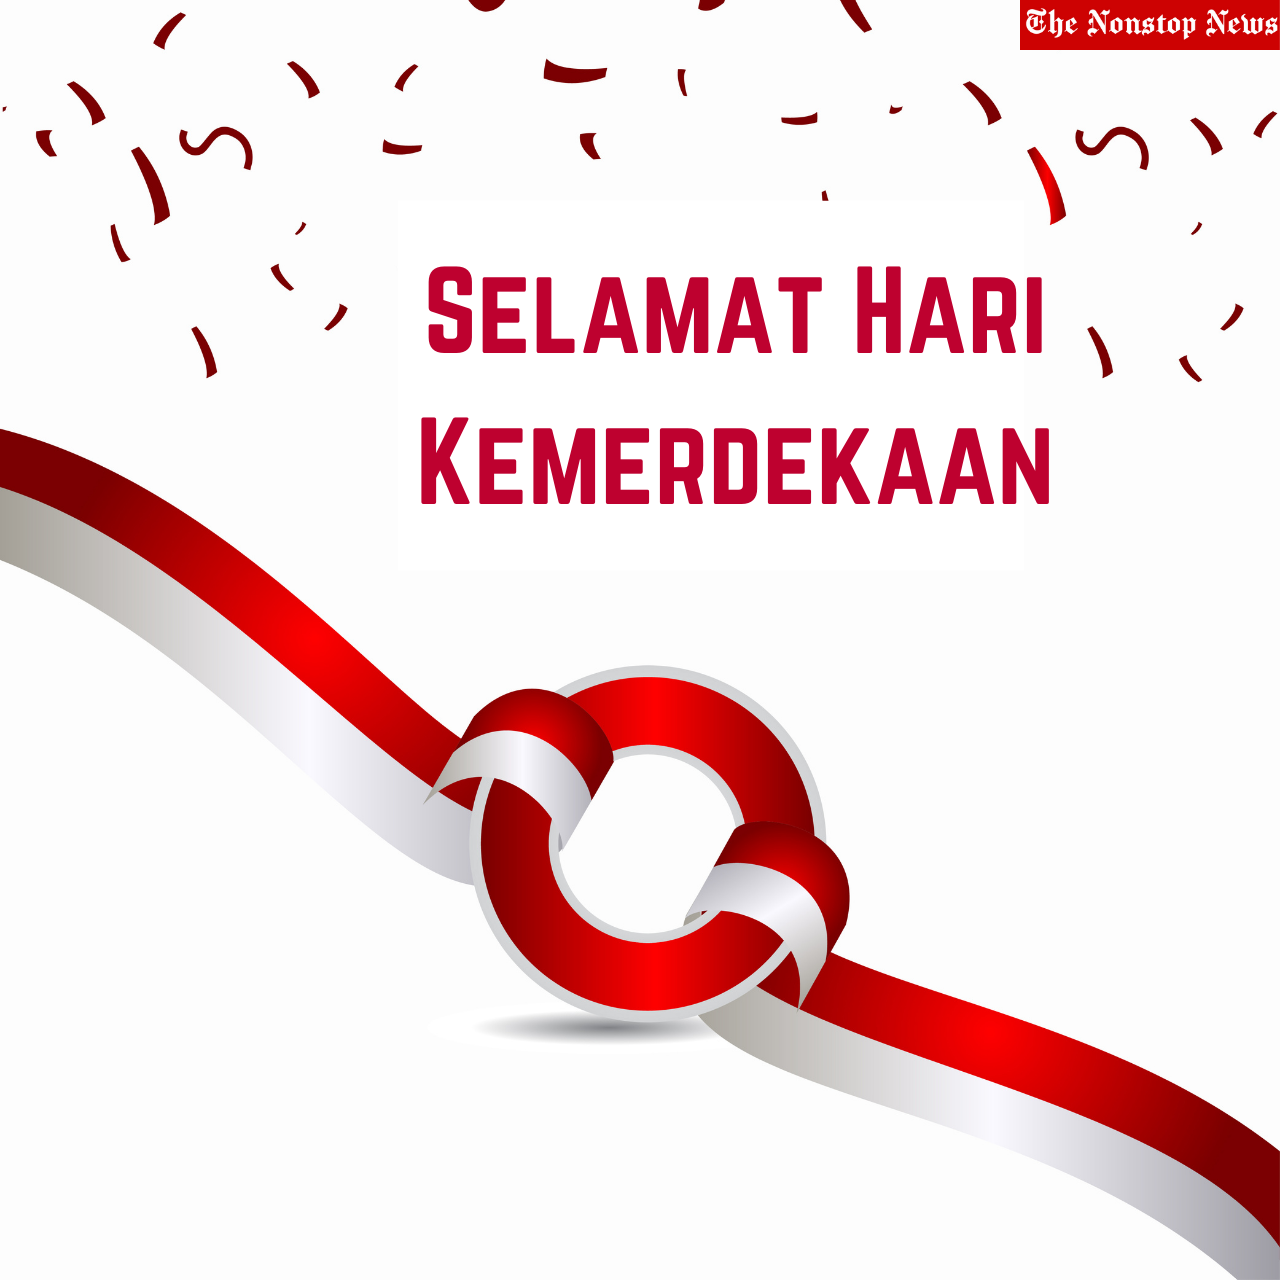 20+ Best Selamat Hari Kemerdekaan 2021 Wishes, HD Images, Quotes, Greetings and Messages to greet siapa pun